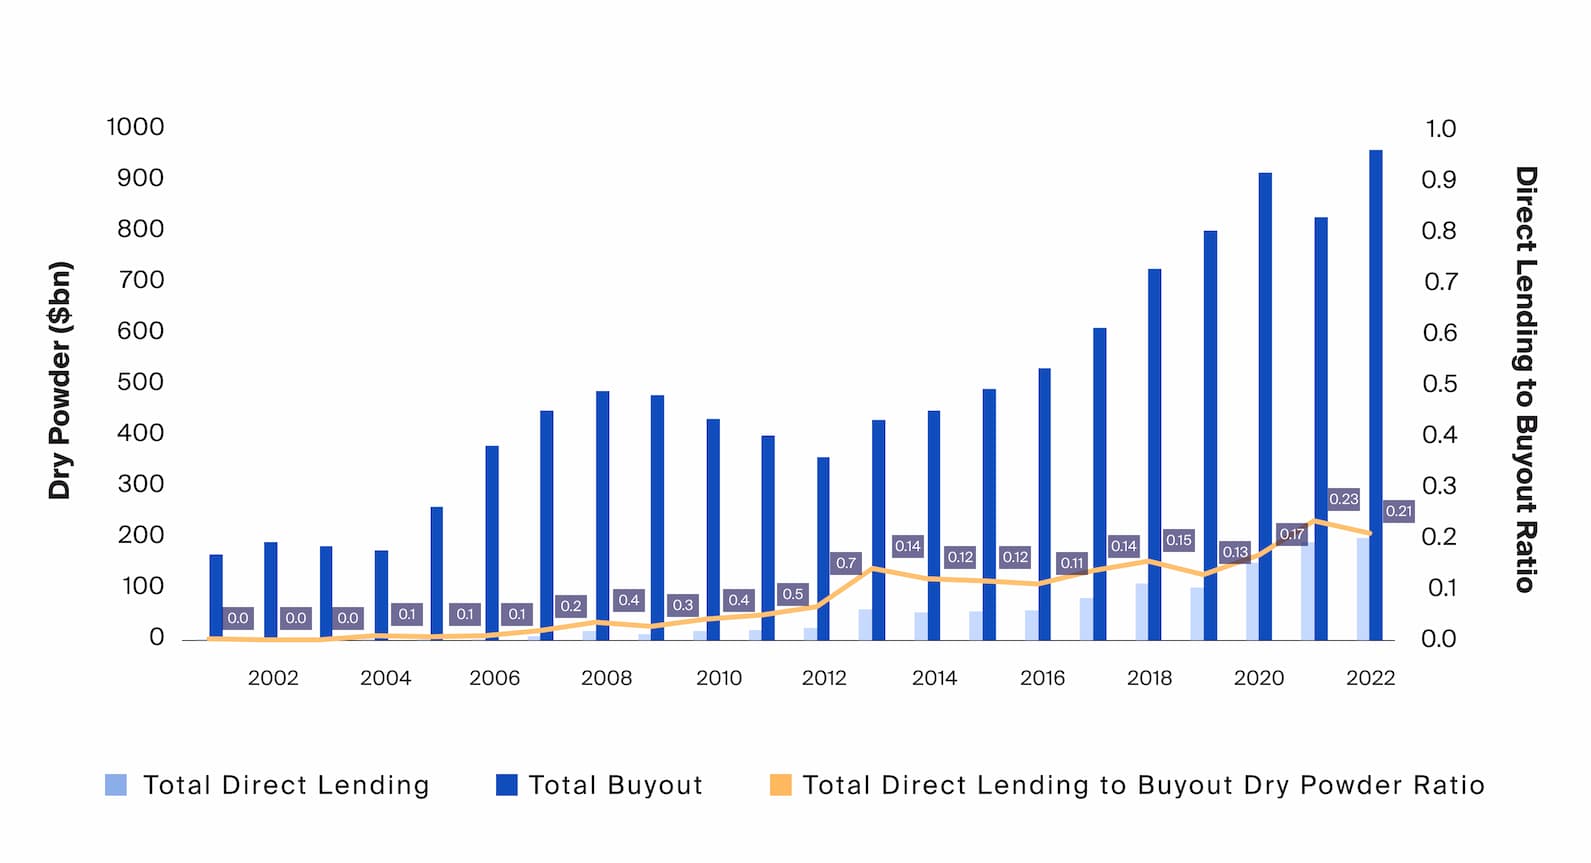 Buyout dry powder levels remain higher than available direct lending capital, potentially providing a potential medium-term tailwind to demand